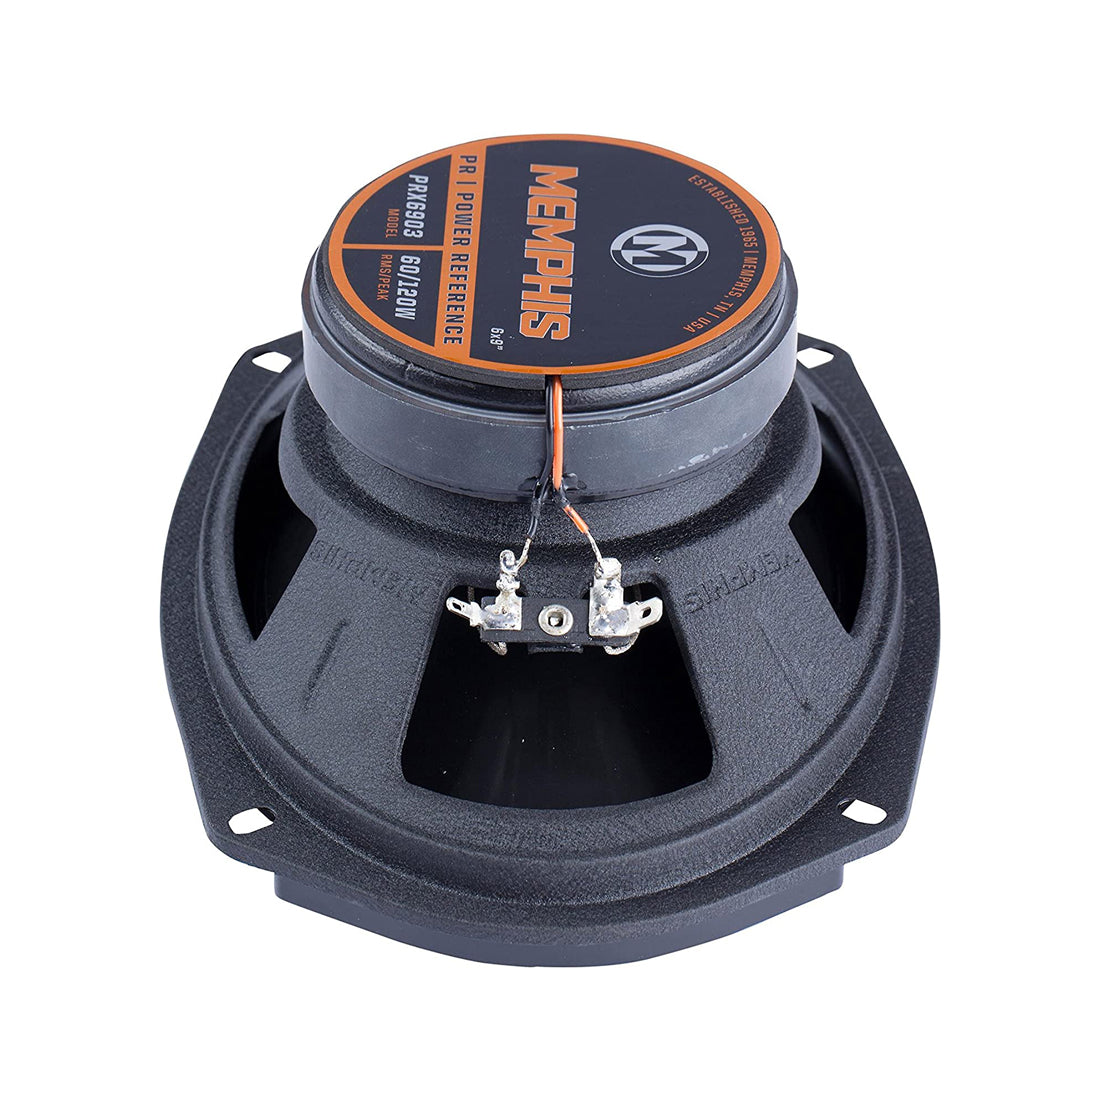 Memphis Audio PRX6903 6" x 9" 120W Max 3-Way Car Stereo Coaxial Speakers - Pair